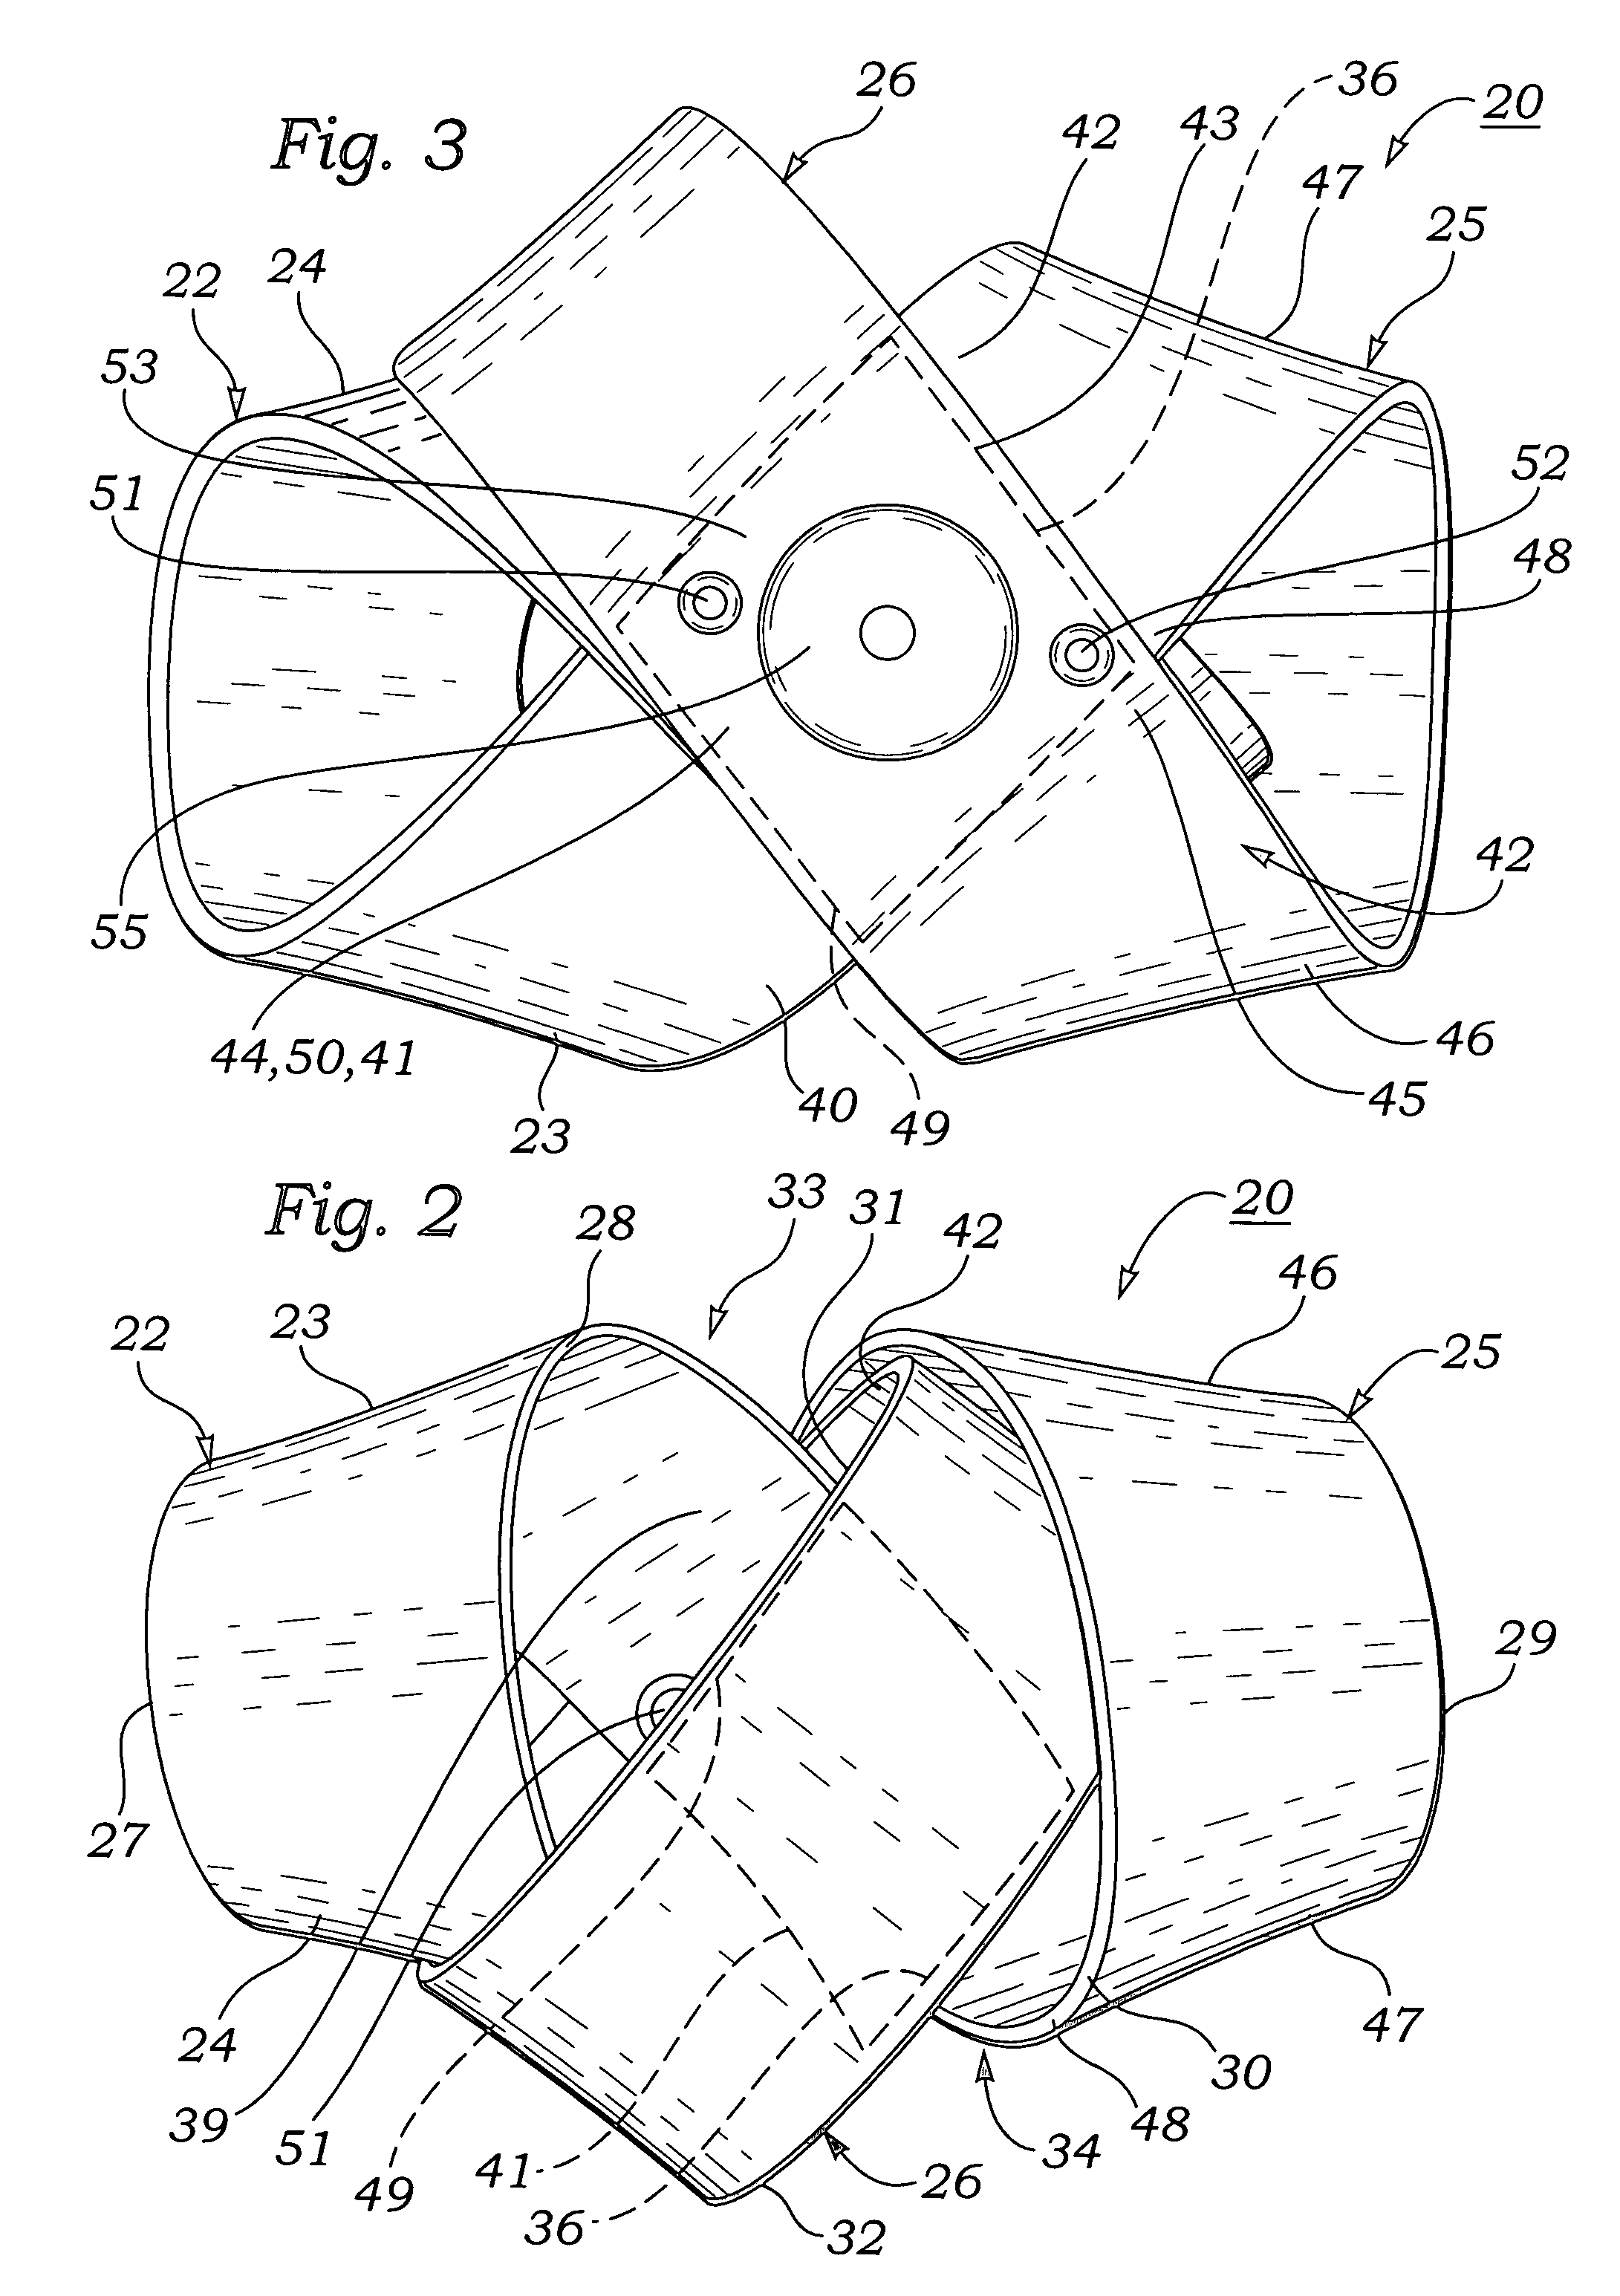 Anti-slosh devices for damping oscillation of liquids in tanks